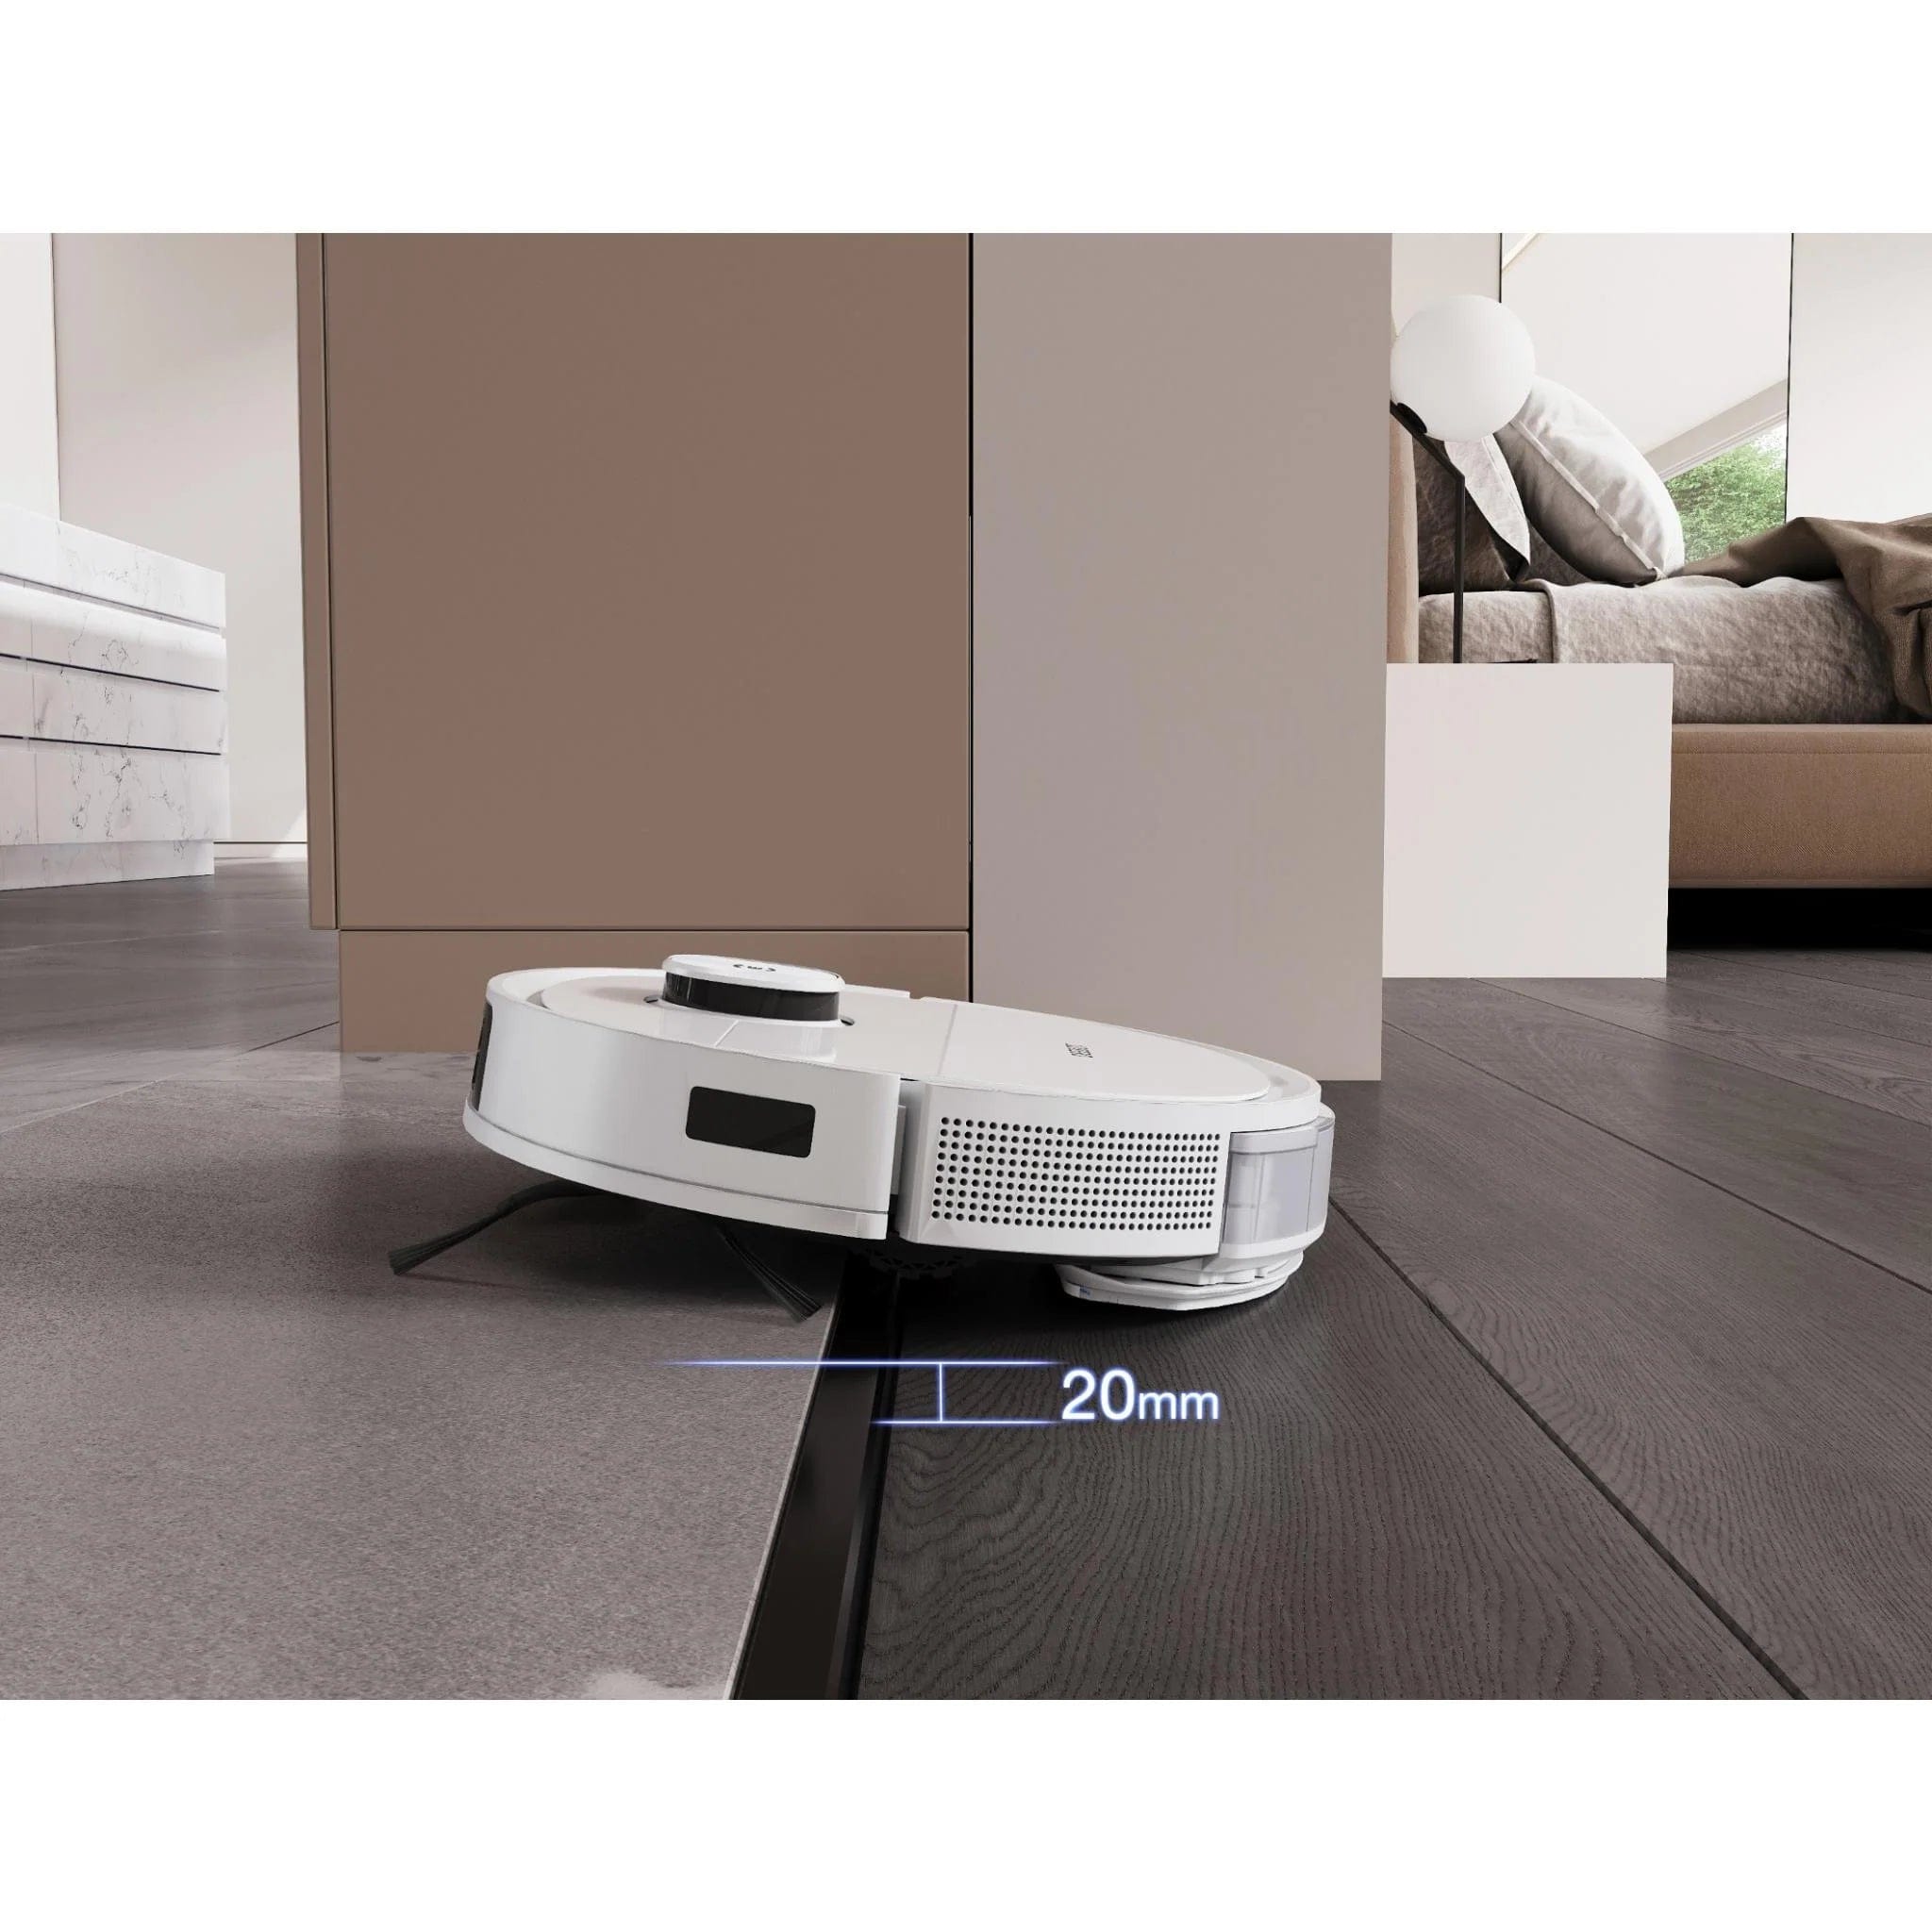 ECOVACS Deebot T9+ Robot Vacuum with Advanced Features